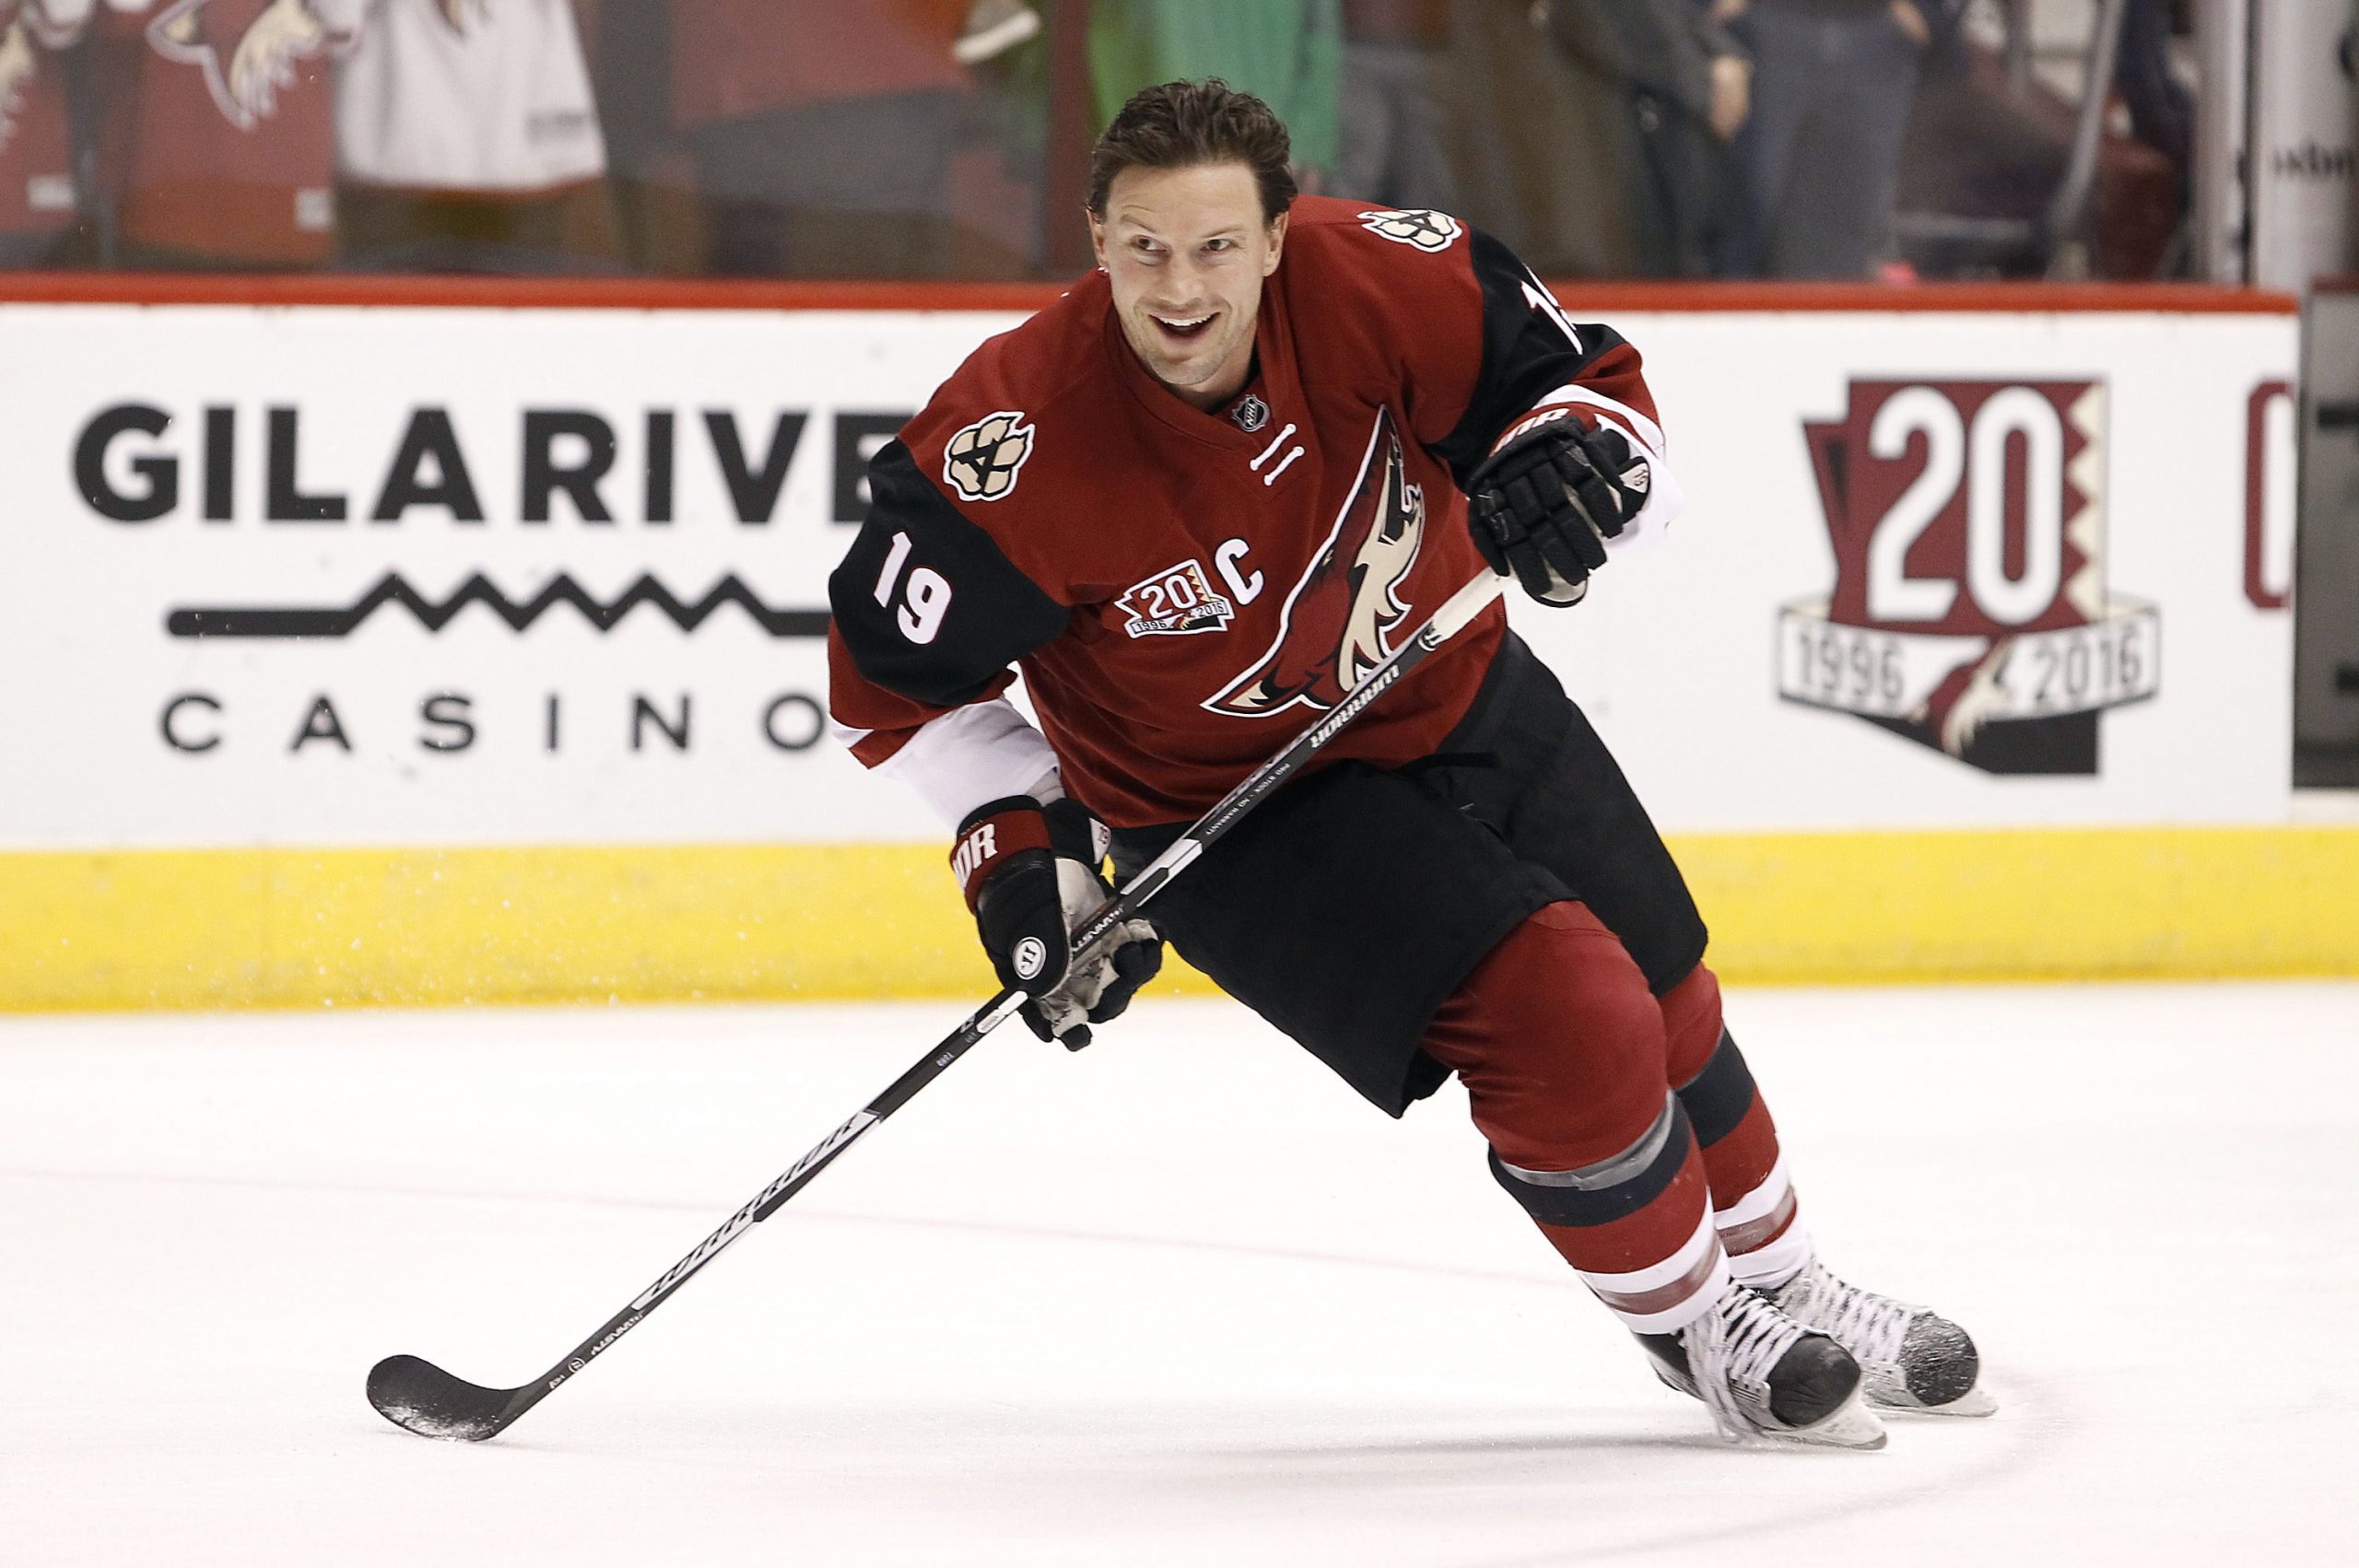 With captain Ekman-Larsson staying, Coyotes ready to 'get back to work